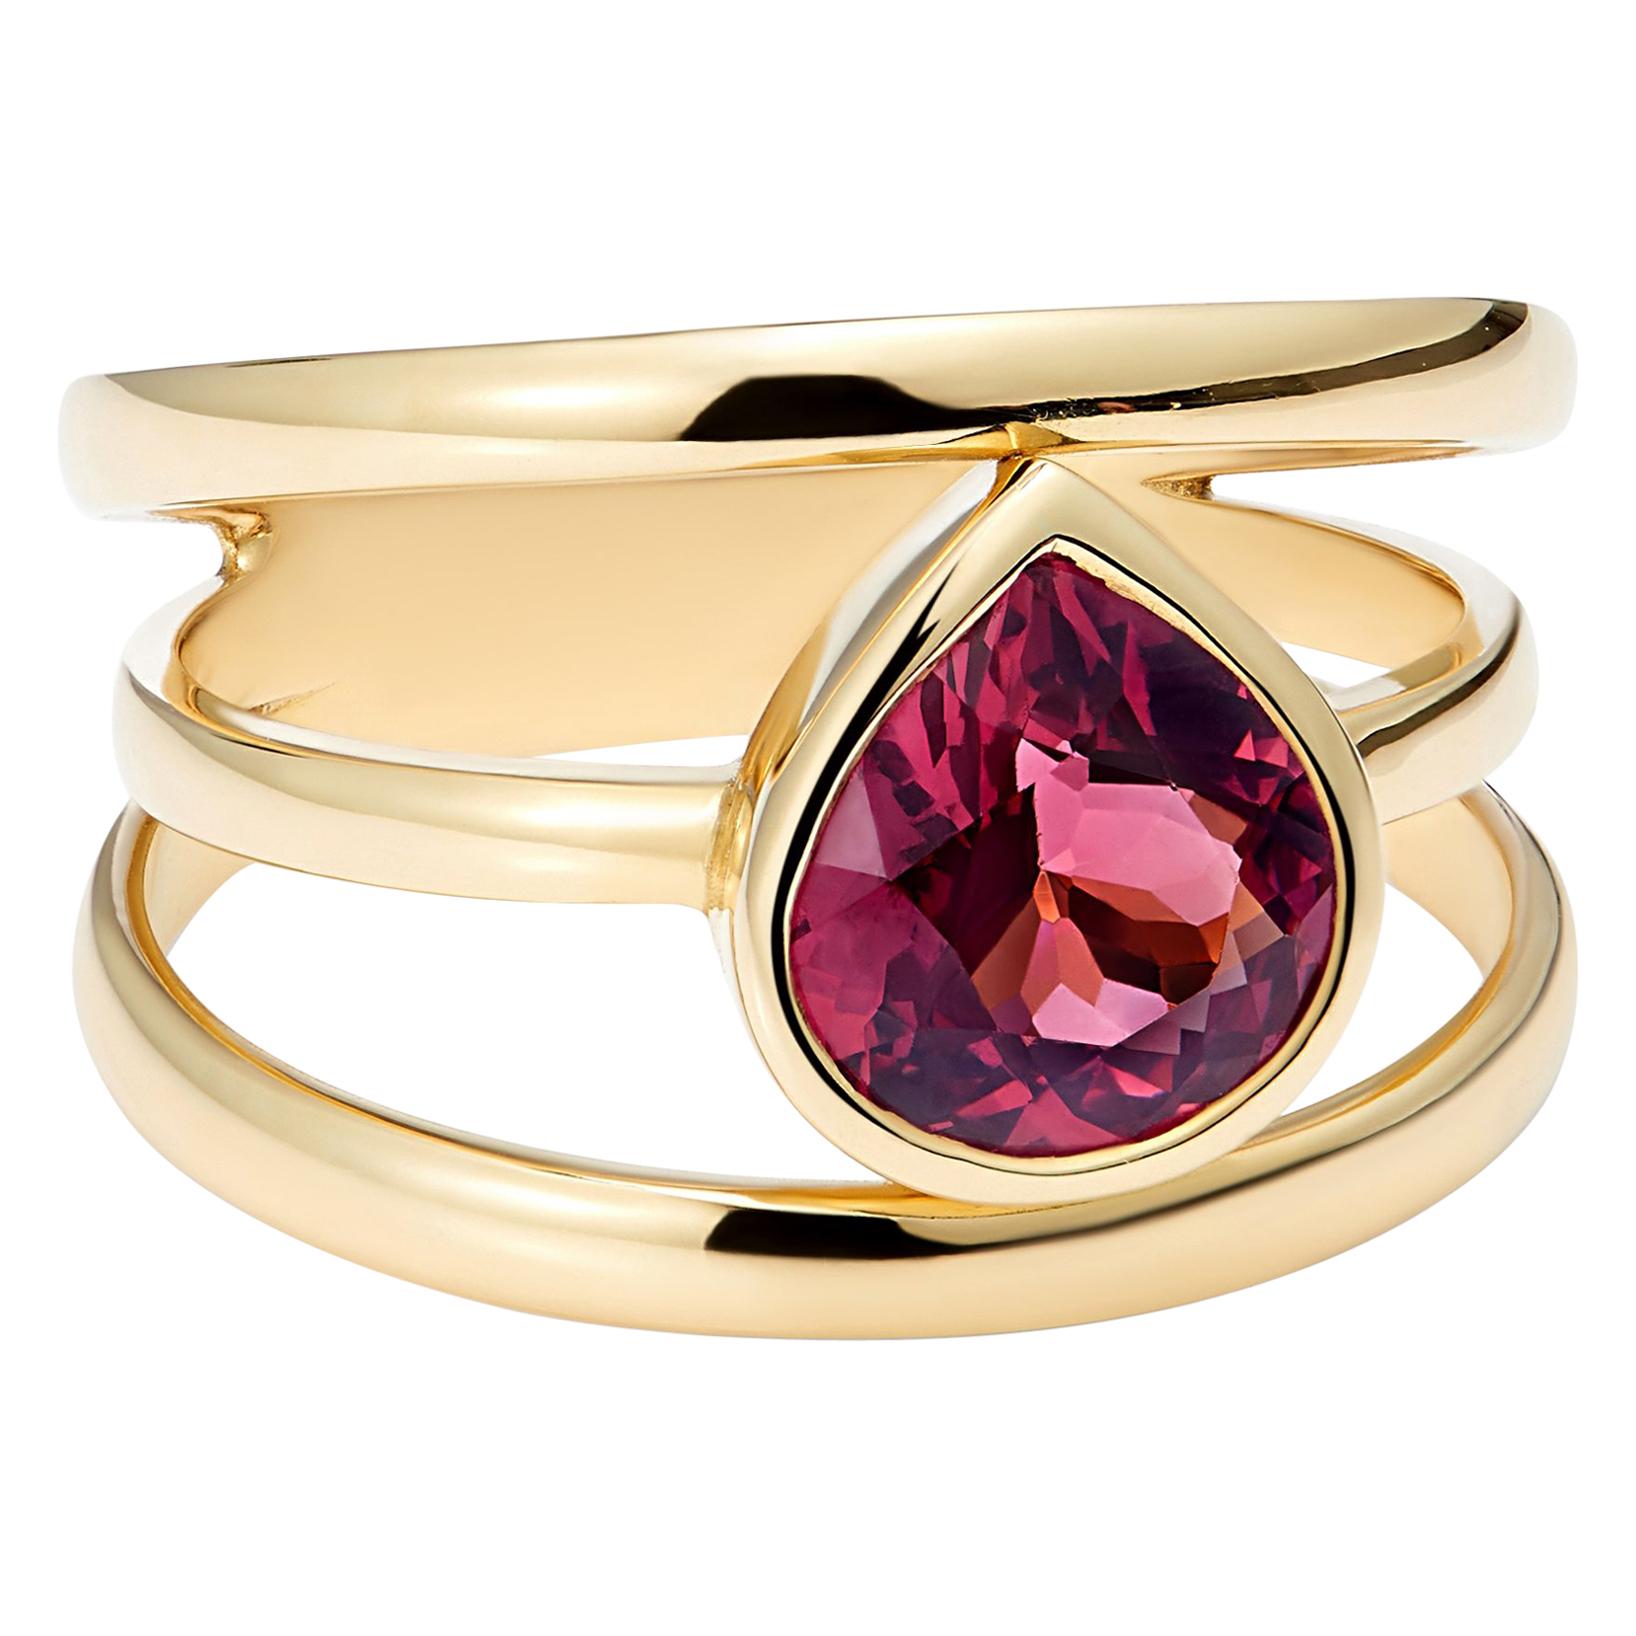 Pear Shaped 1.5 carat Spinel and 18 Karat Yellow Gold 3 Band Ring